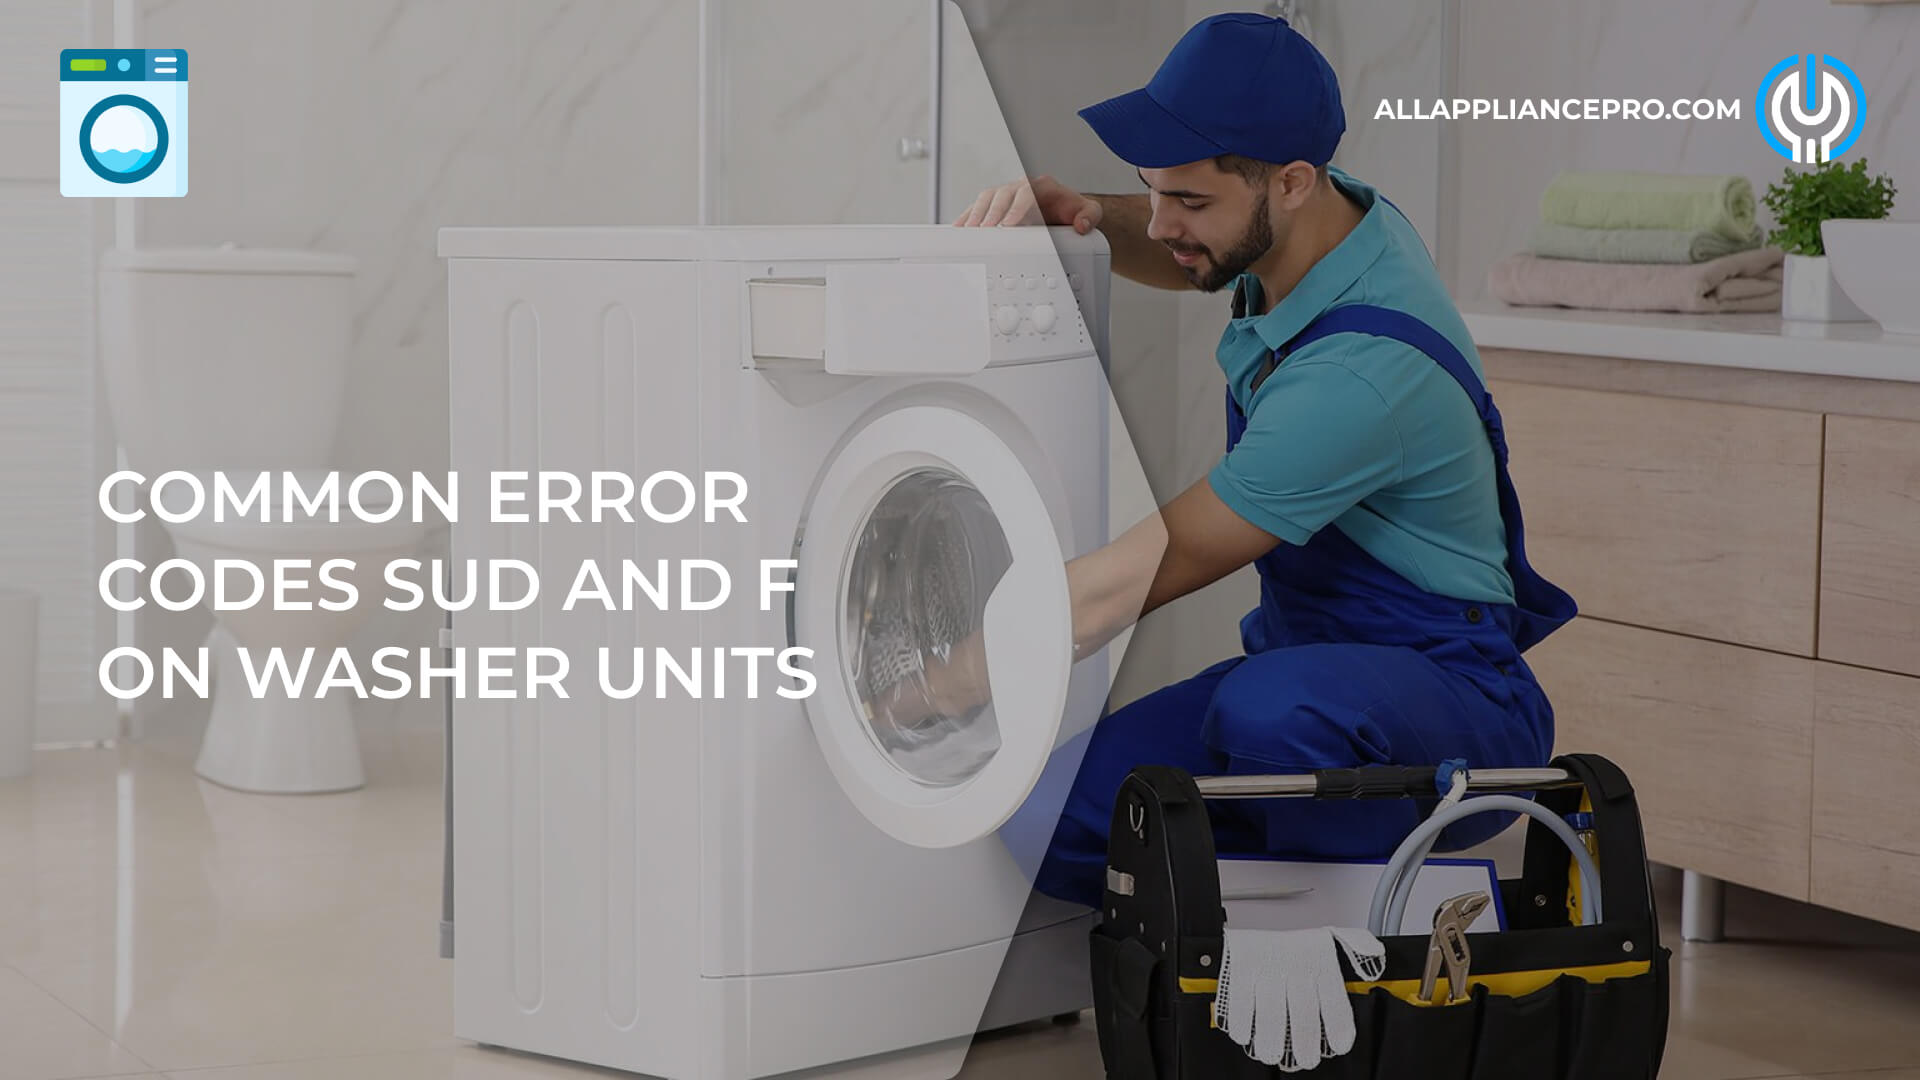 Common Error Codes SUD and F on Washer Units 